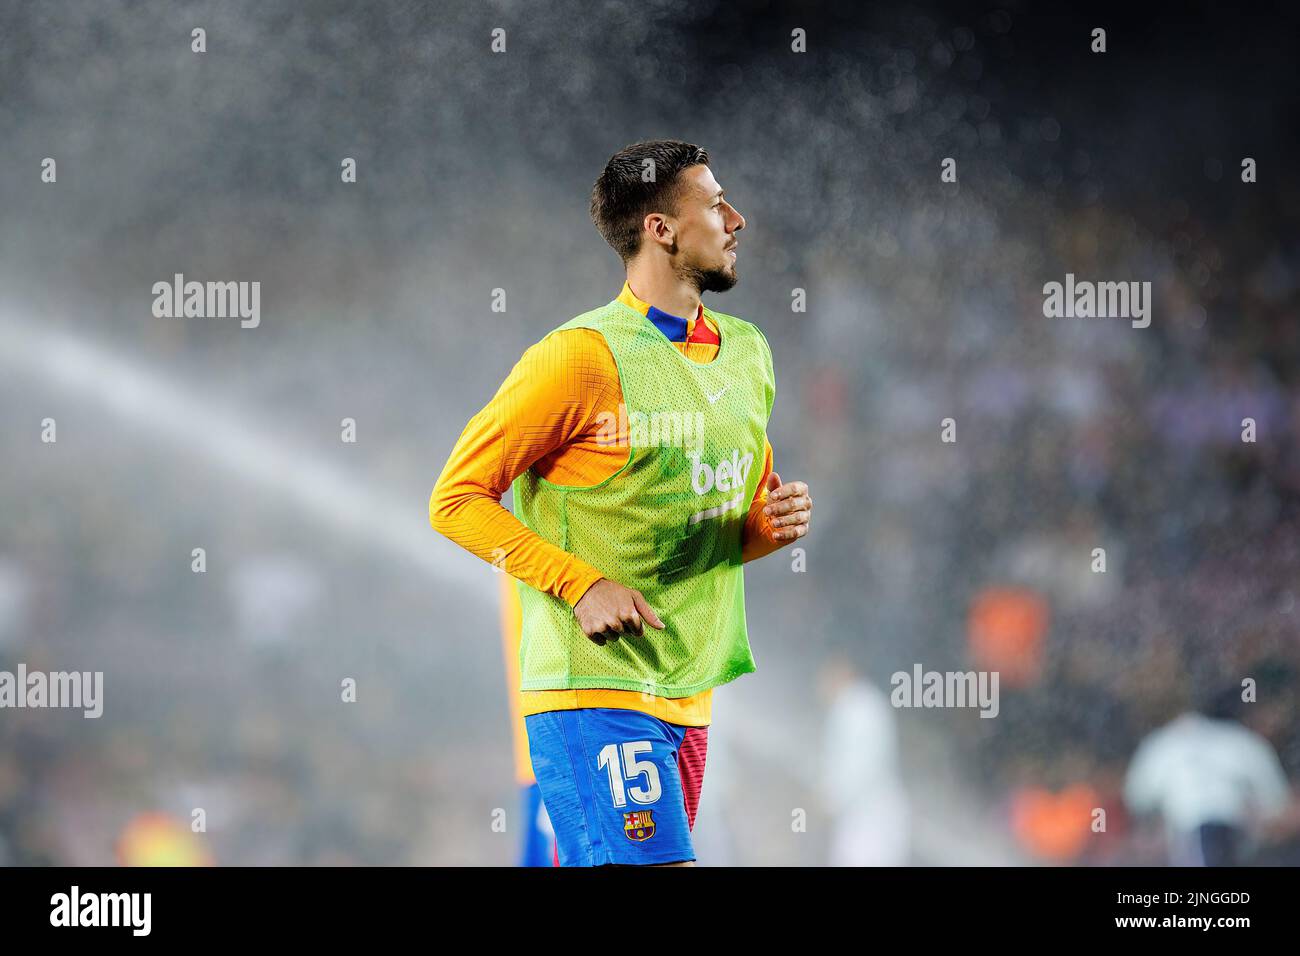 BARCELONA - MAY 10: Lenglet warms up prior to the La Liga match between FC Barcelona and Real Club Celta de Vigo at the Camp Nou Stadium on May 10, 20 Stock Photo